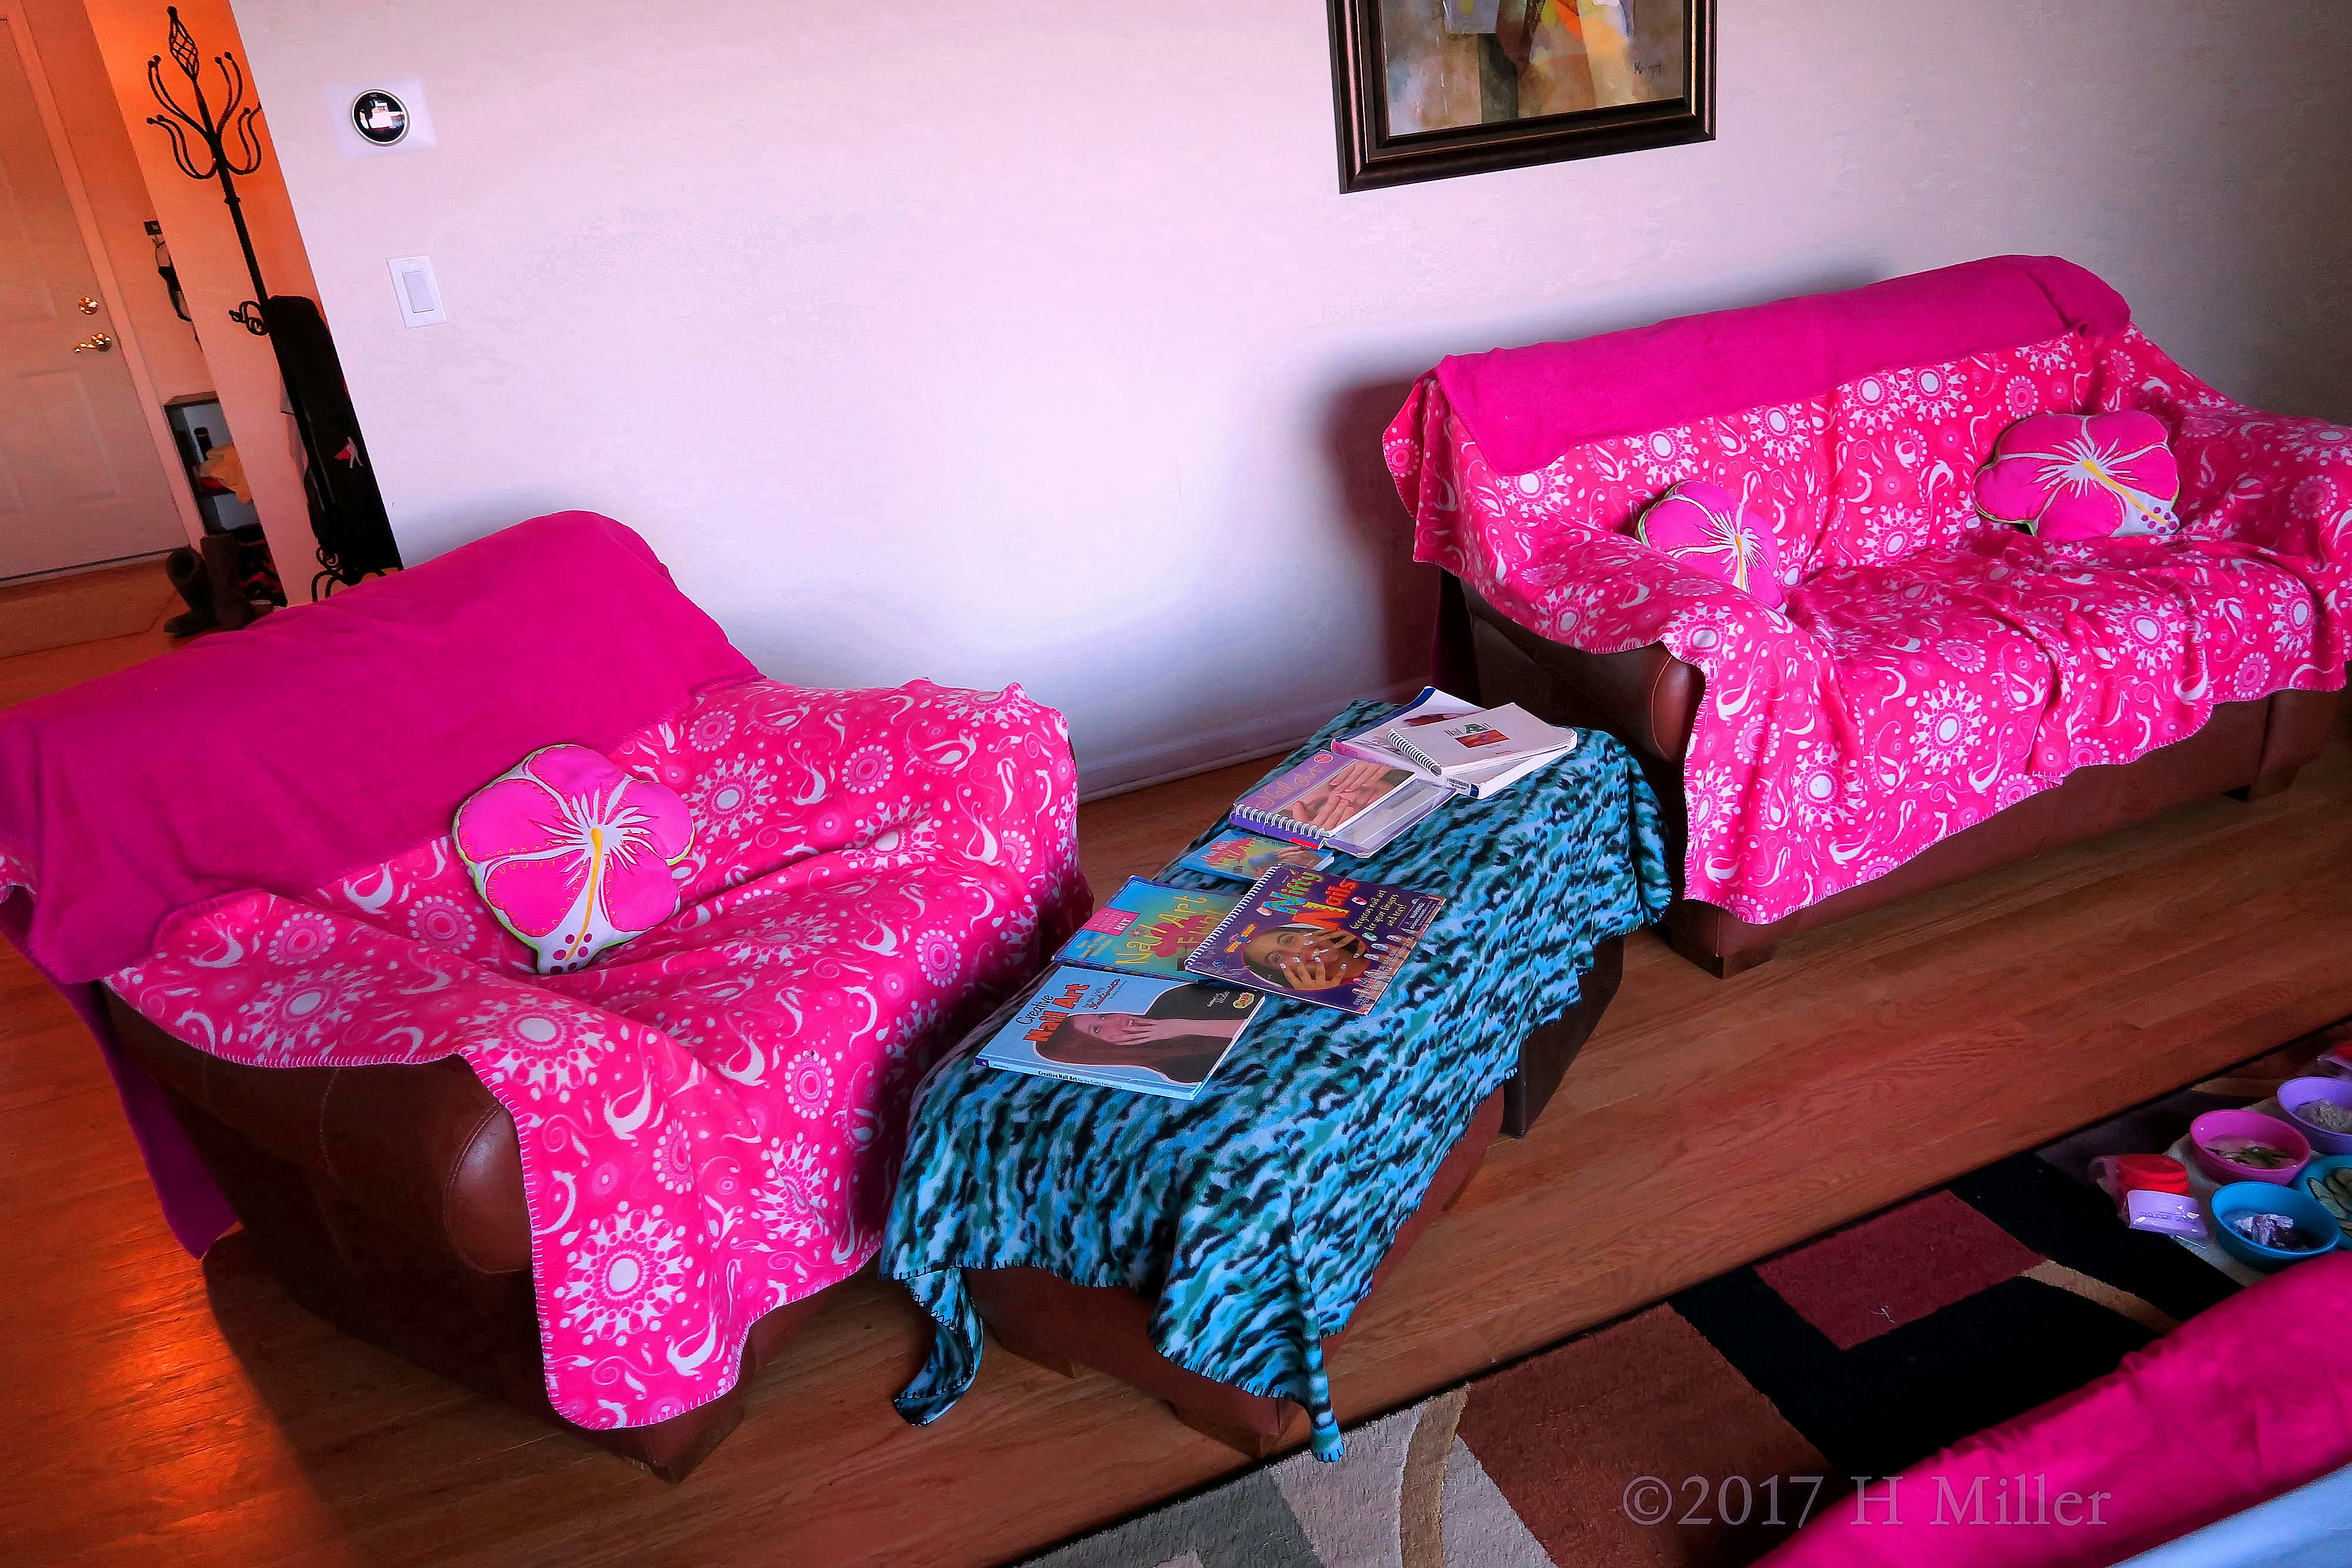 Pink Spa Throws Decorate A Cozy Lounge Area With Nail Art Design Books On Display